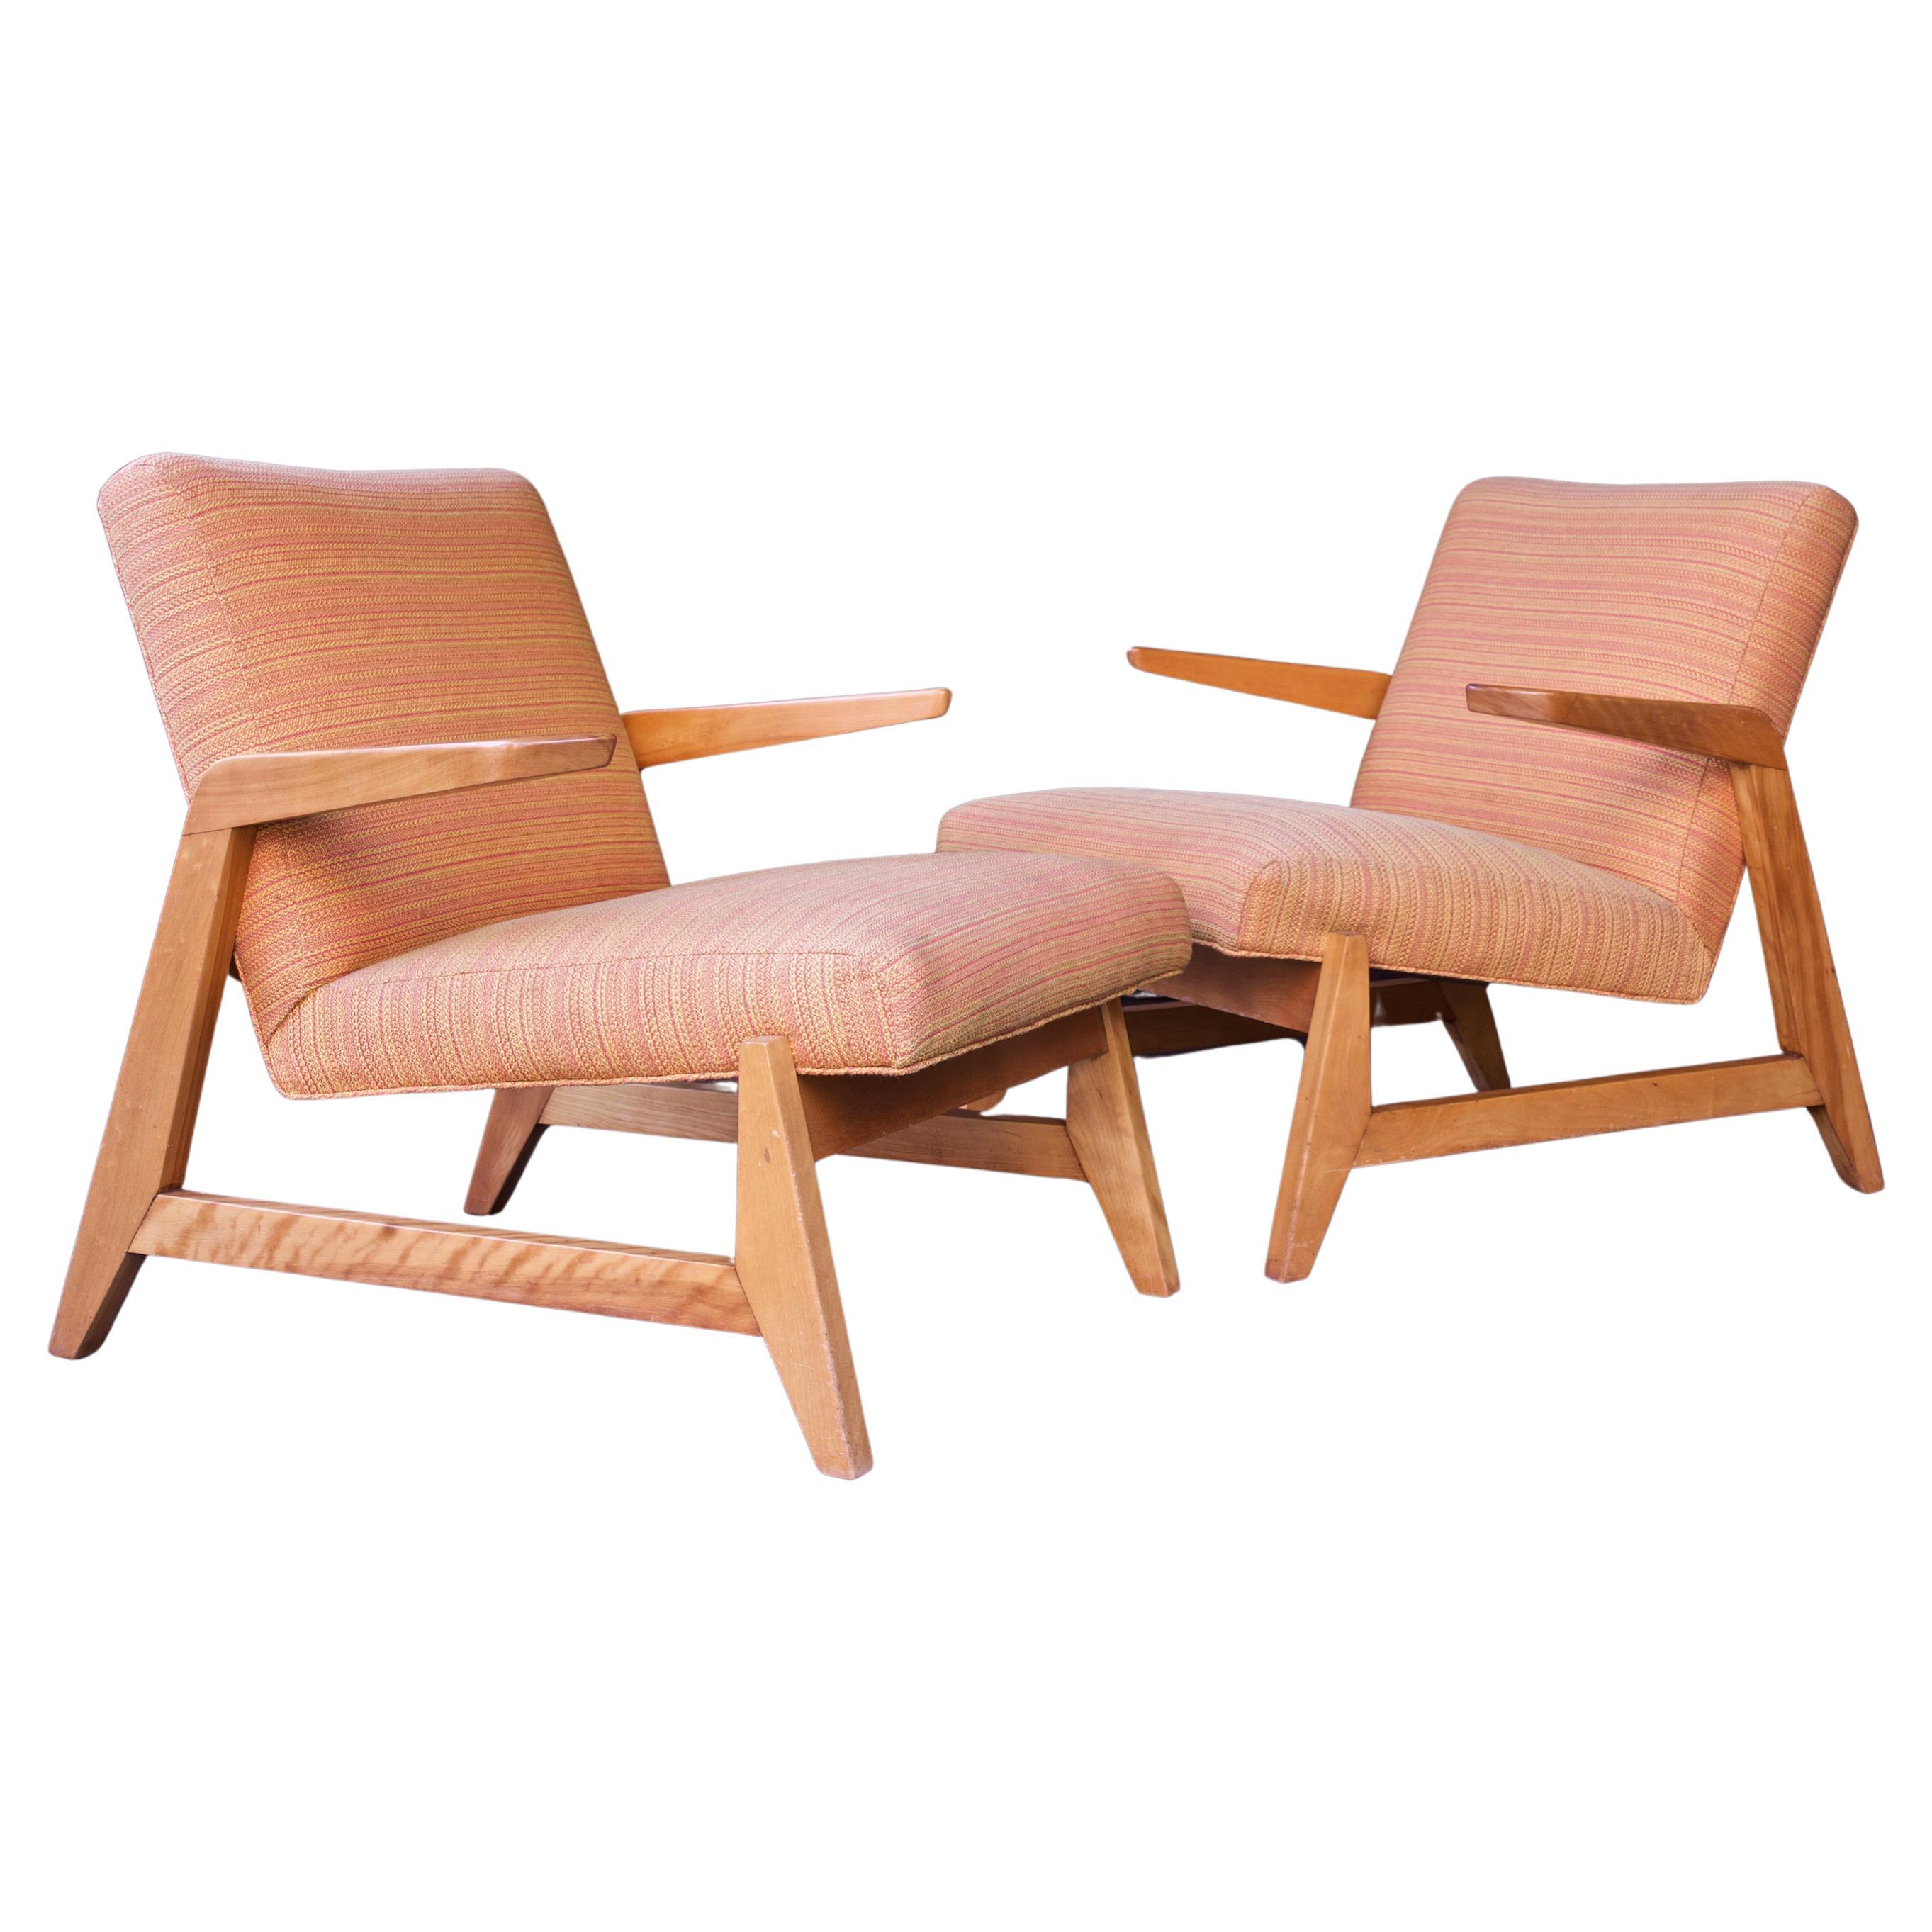 Pair Mid-Century Greenbelt Lounge Chairs by Ralph Rapson for Knoll 1940s Modern